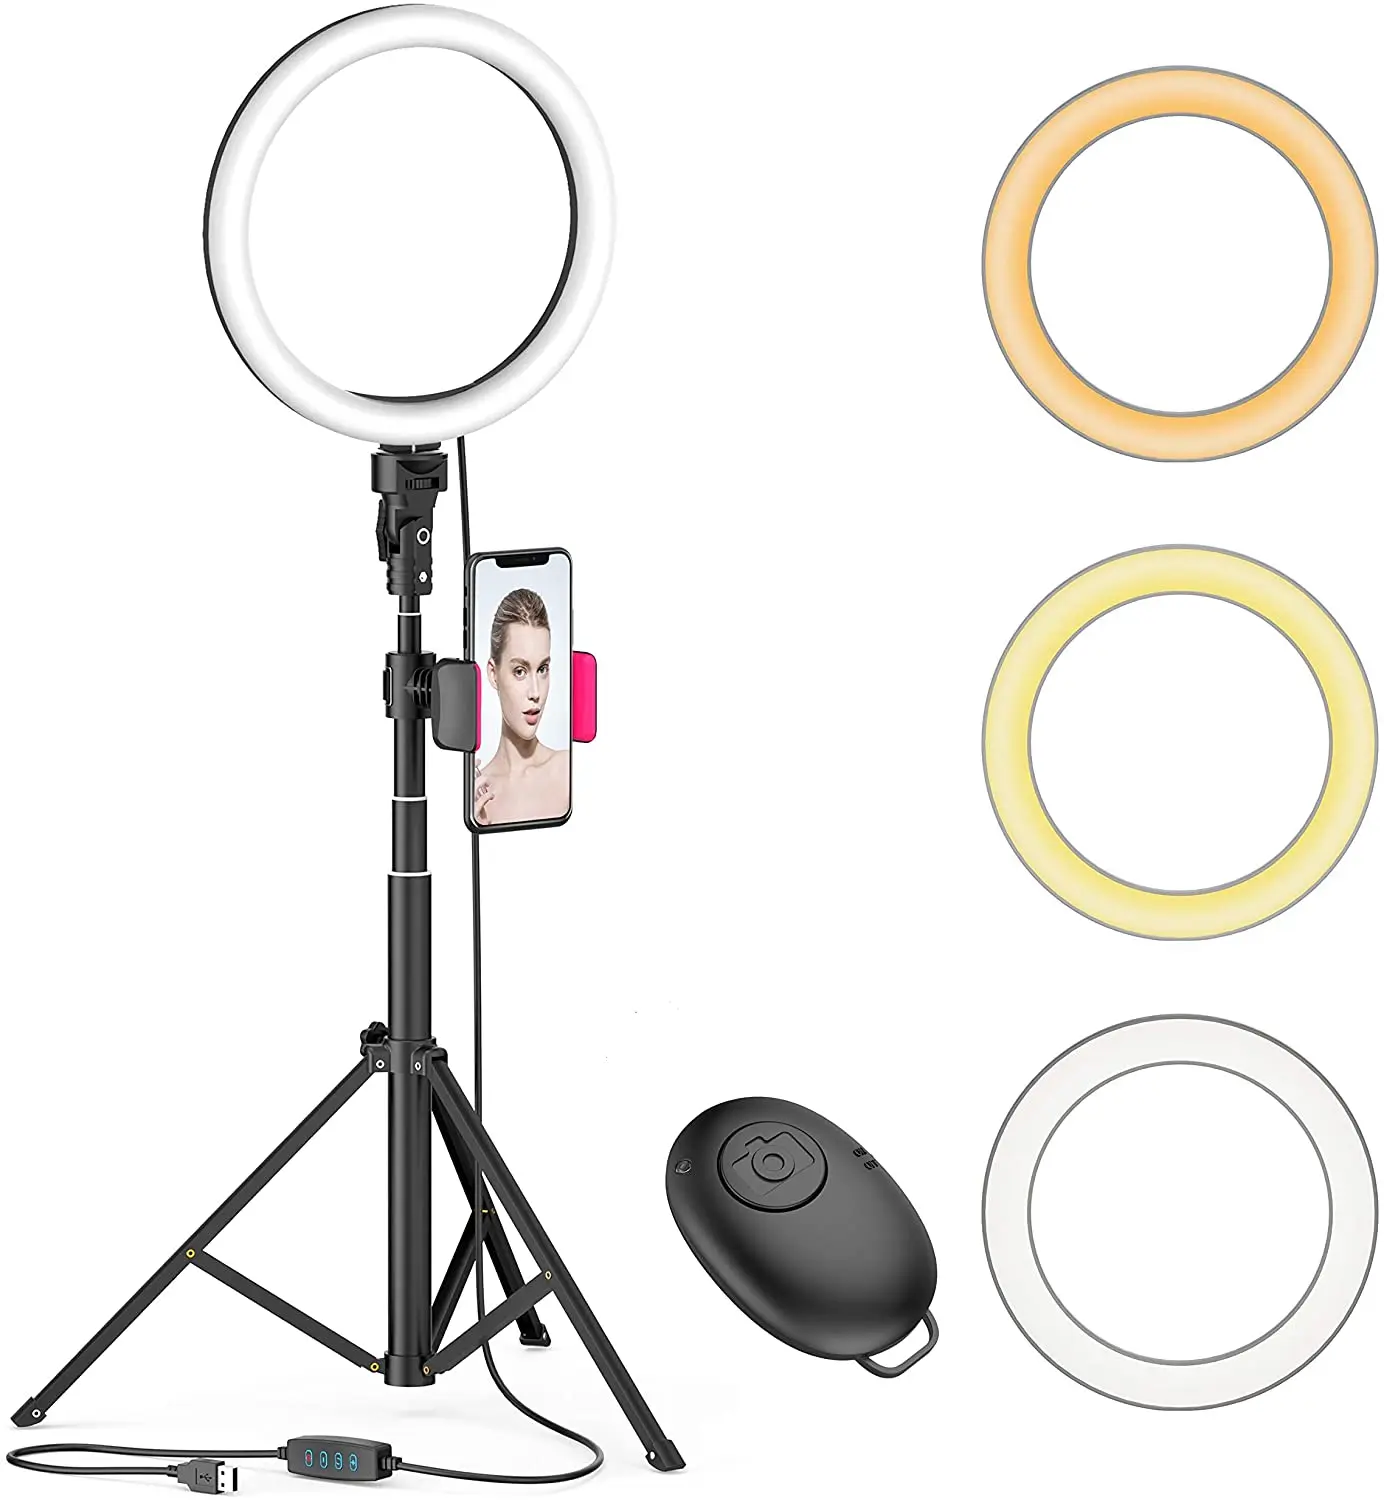 Tlwangl Ring Light 6/10 Inch Round/Heart-Shaped Dimmable Cold Warm LED Ring Light Makeup Photography Video Live Stream Lamp Tricolor Fill Light Color : 10inch 